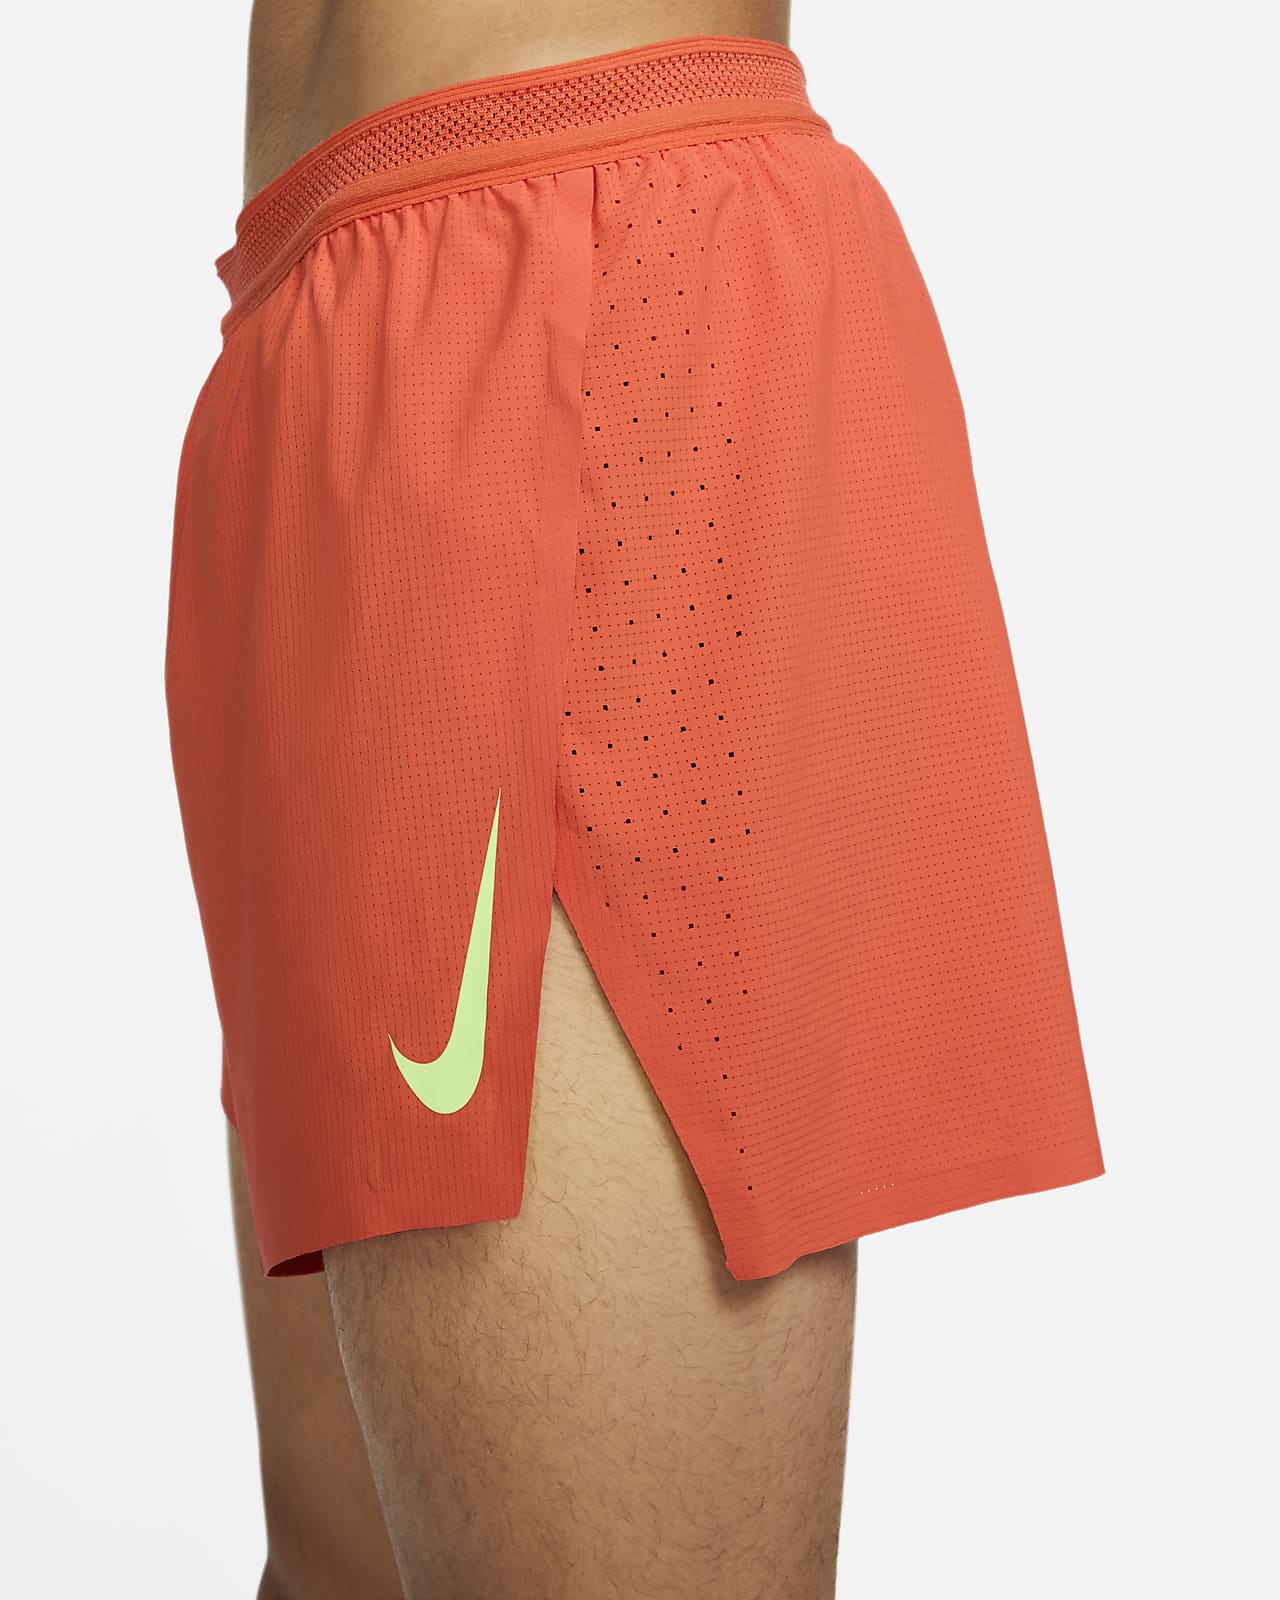 Instituto Composición Casarse Nike AeroSwift Men's 4" (10cm approx.) Running Shorts. Nike ID